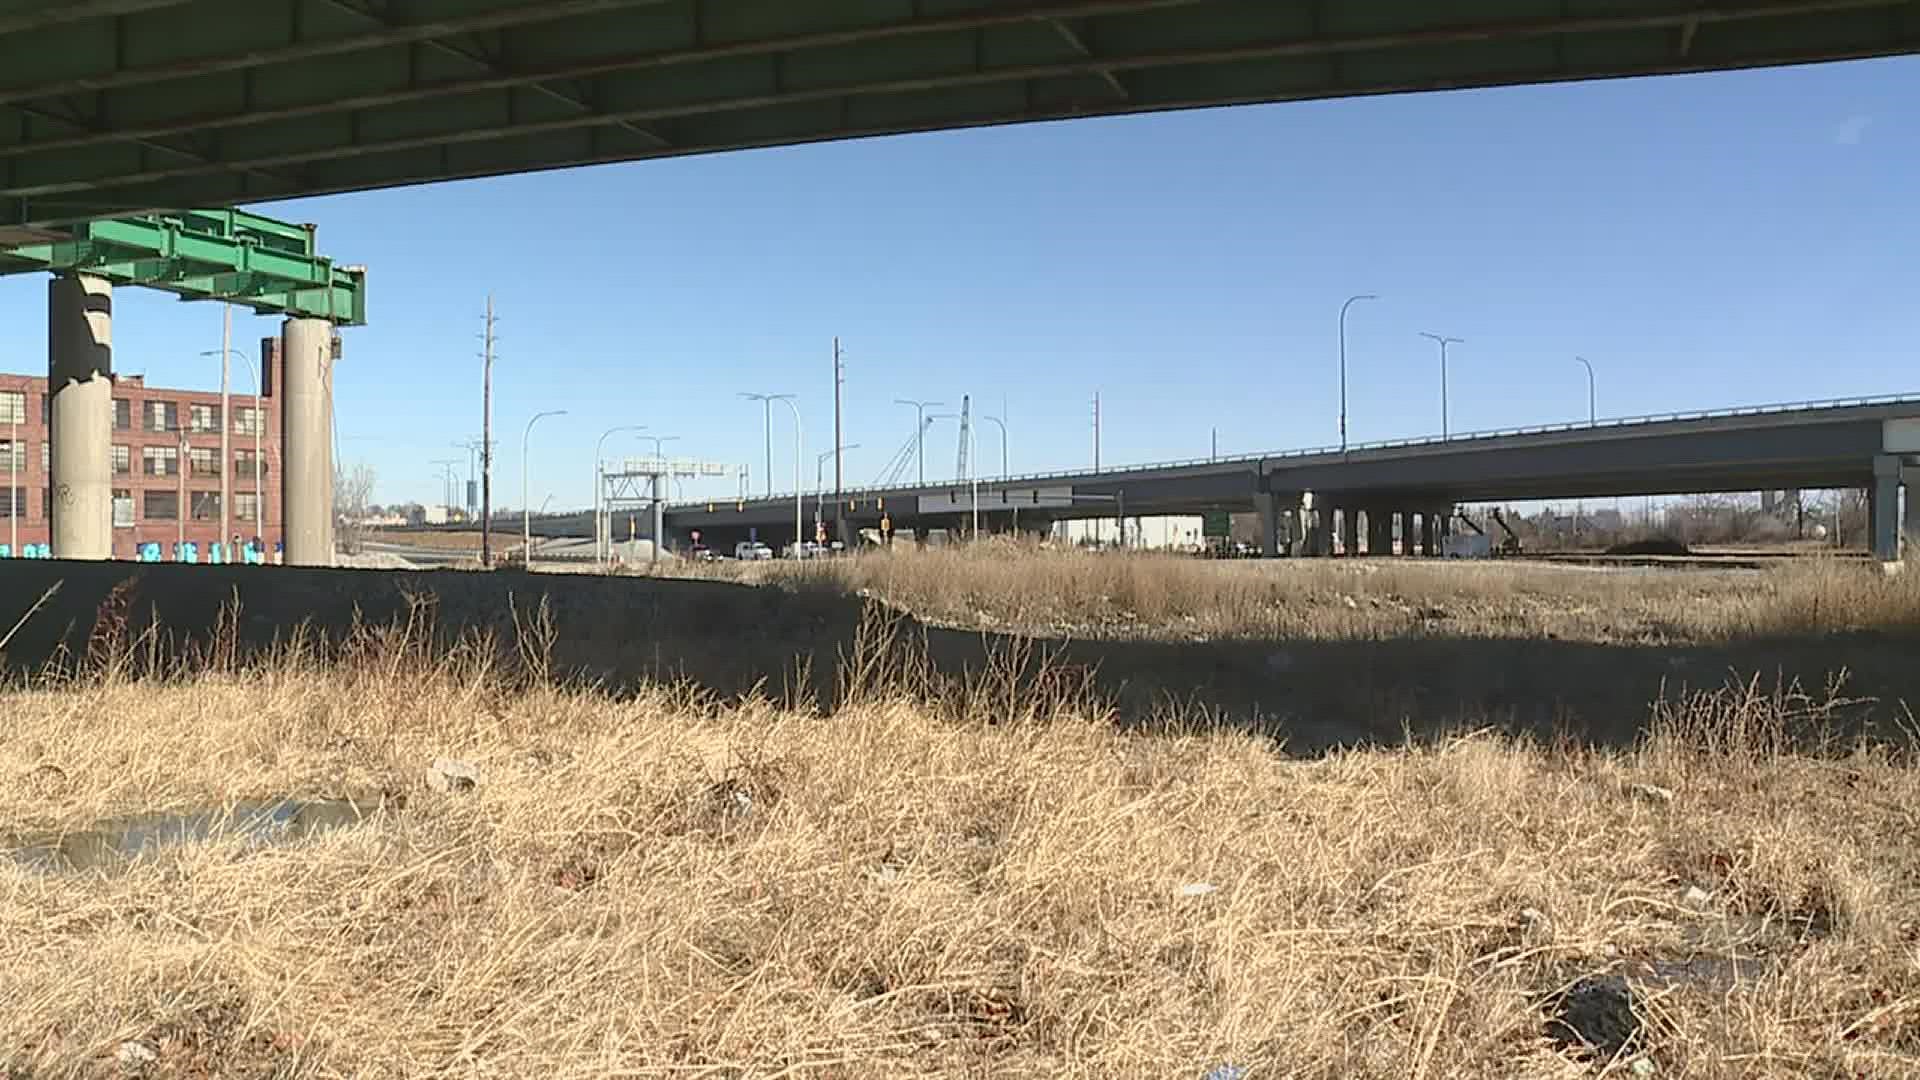 The proposed skatepark would go in downtown Moline, partially under the new I-74 bridge.